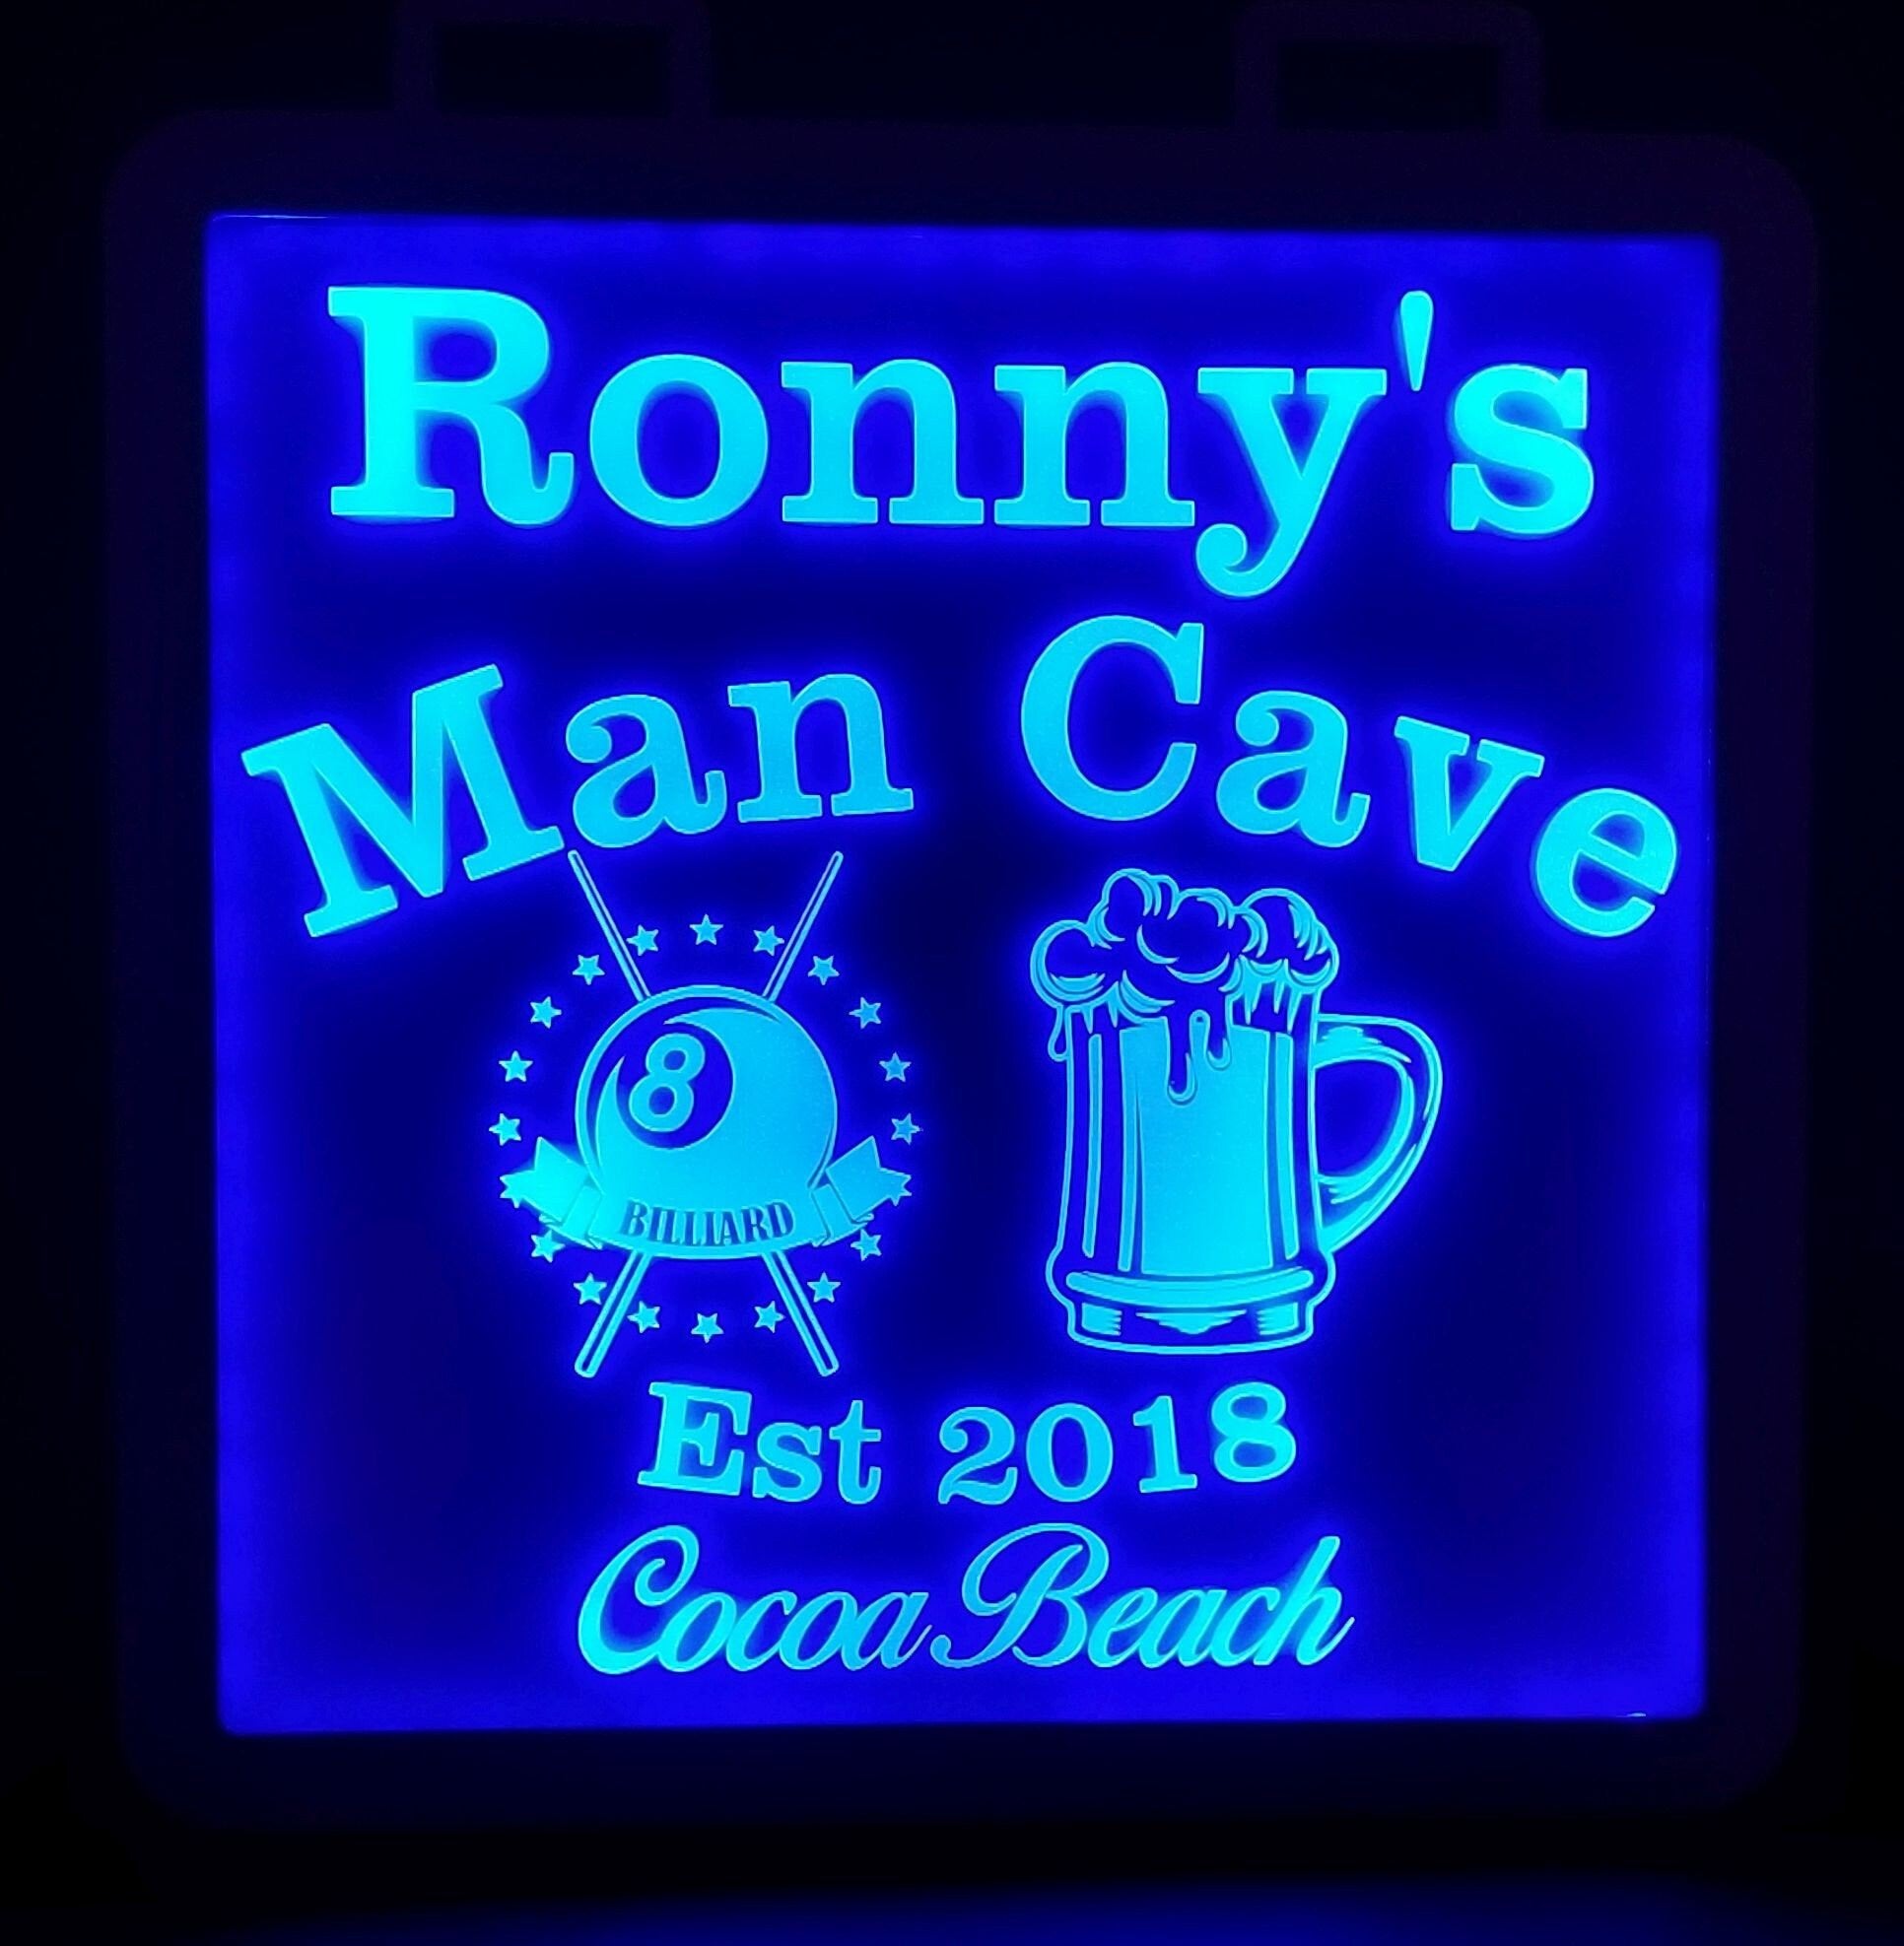 Your Custom Logo as a LED Wall Sign Neon Like - Color Changing Remote Control - 4 Sizes Made in USA Free Shipping